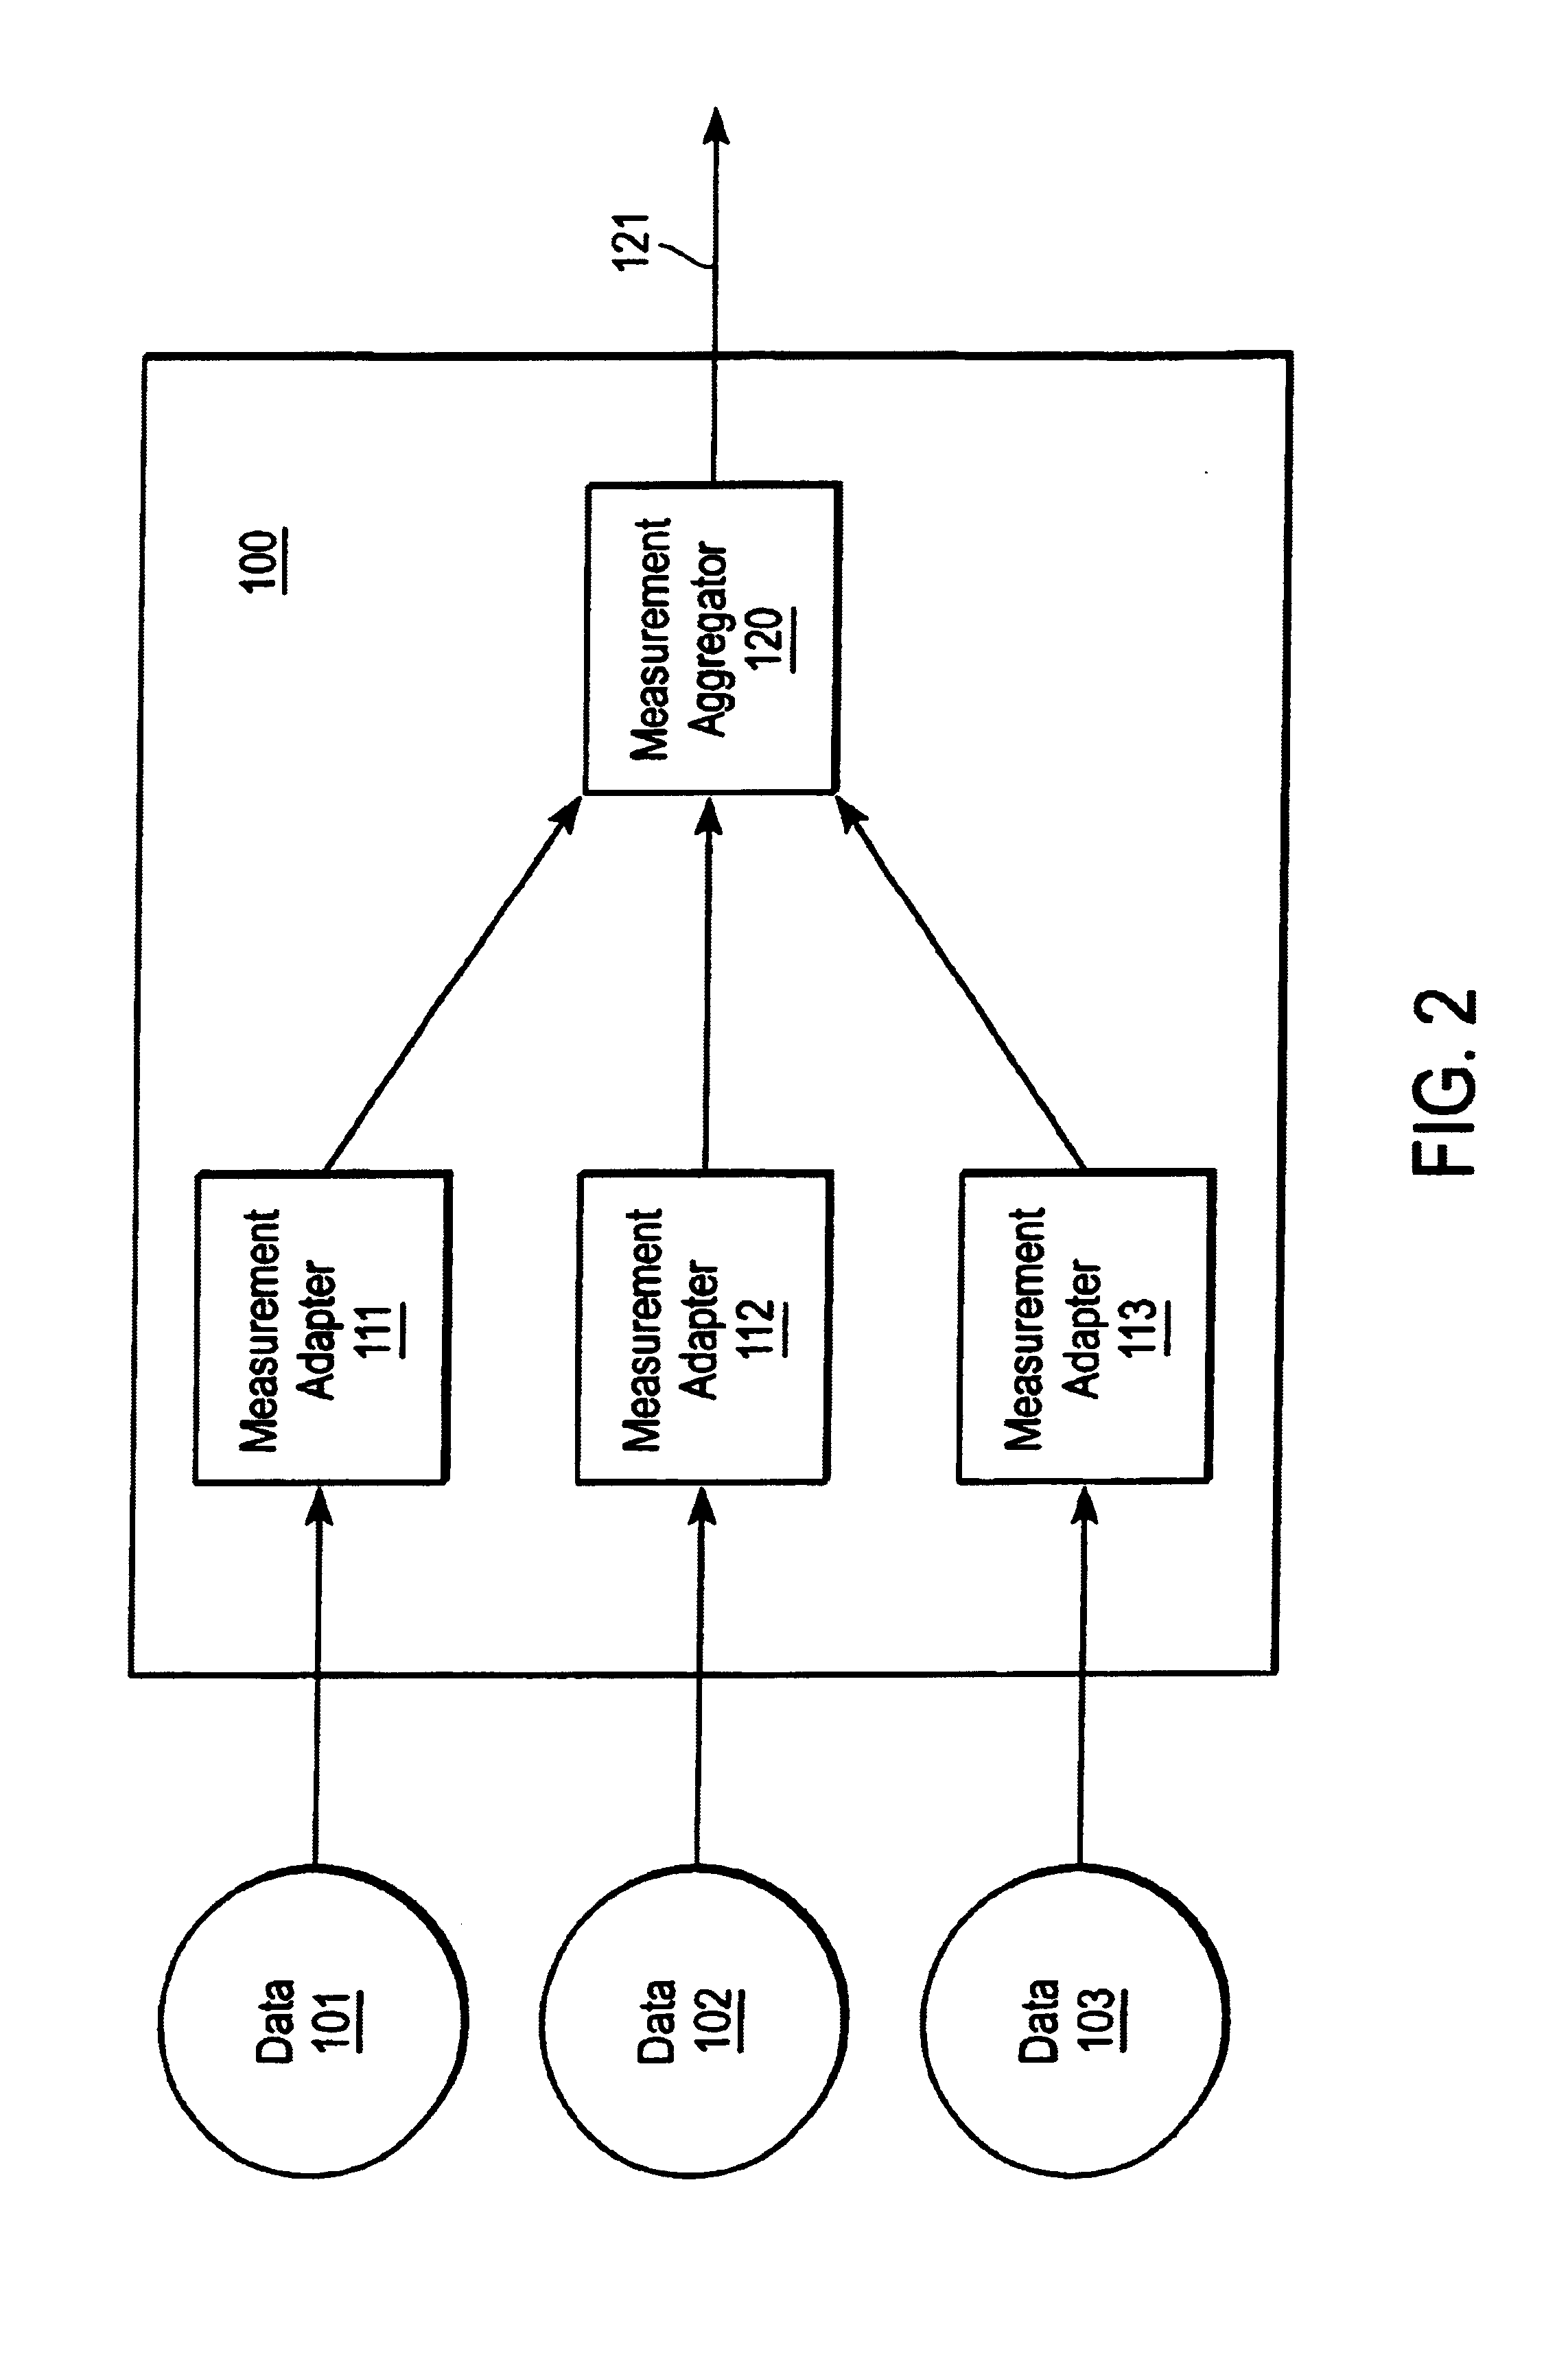 Method and system for automatically interpreting computer system performance measurements